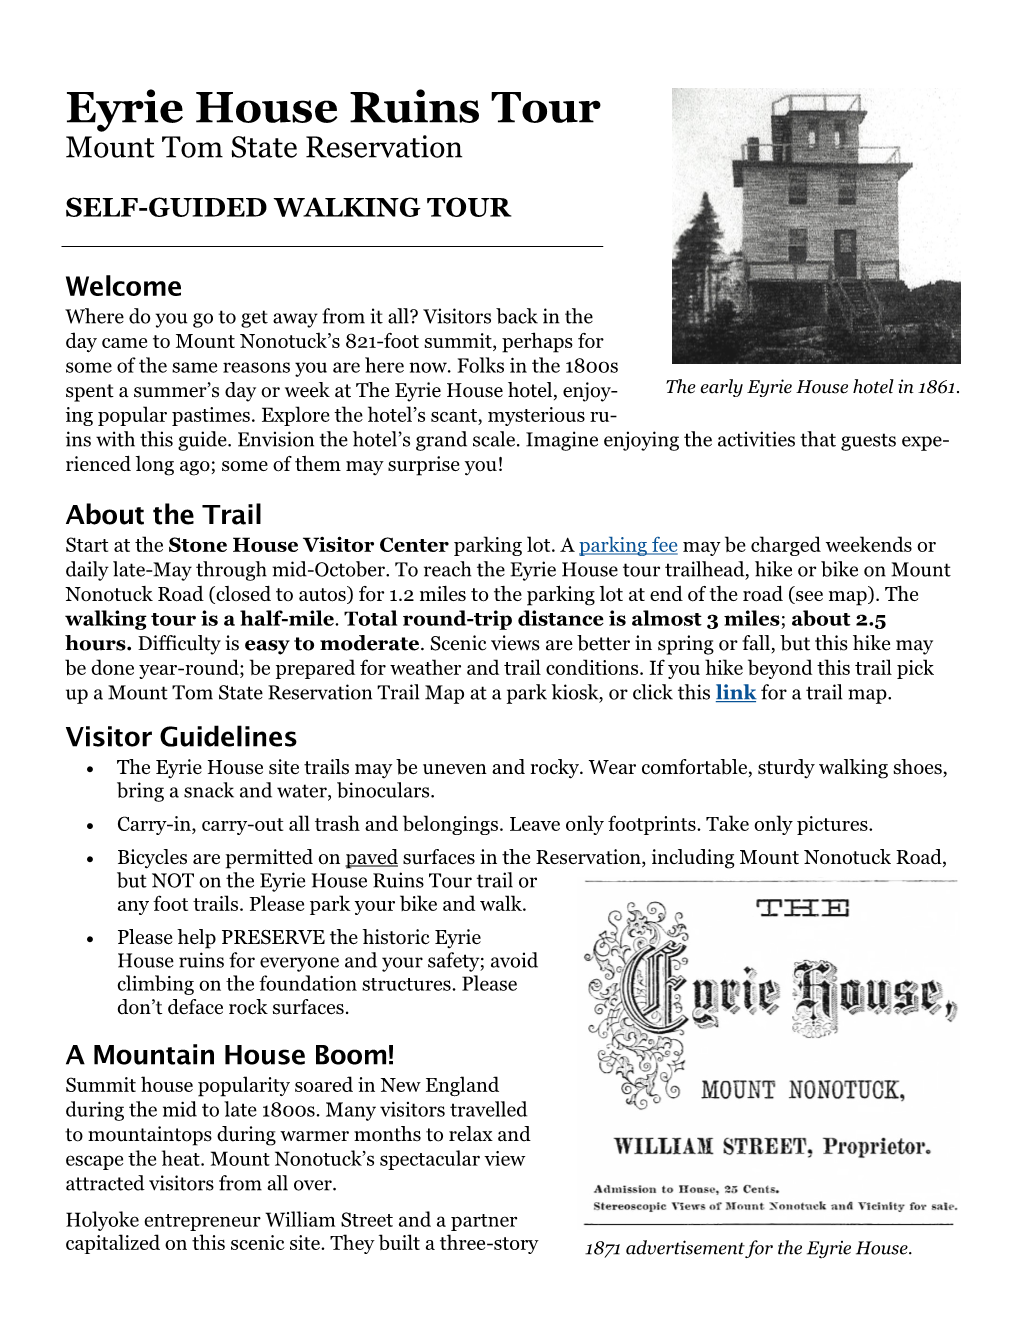 Eyrie House Ruins Tour Mount Tom State Reservation